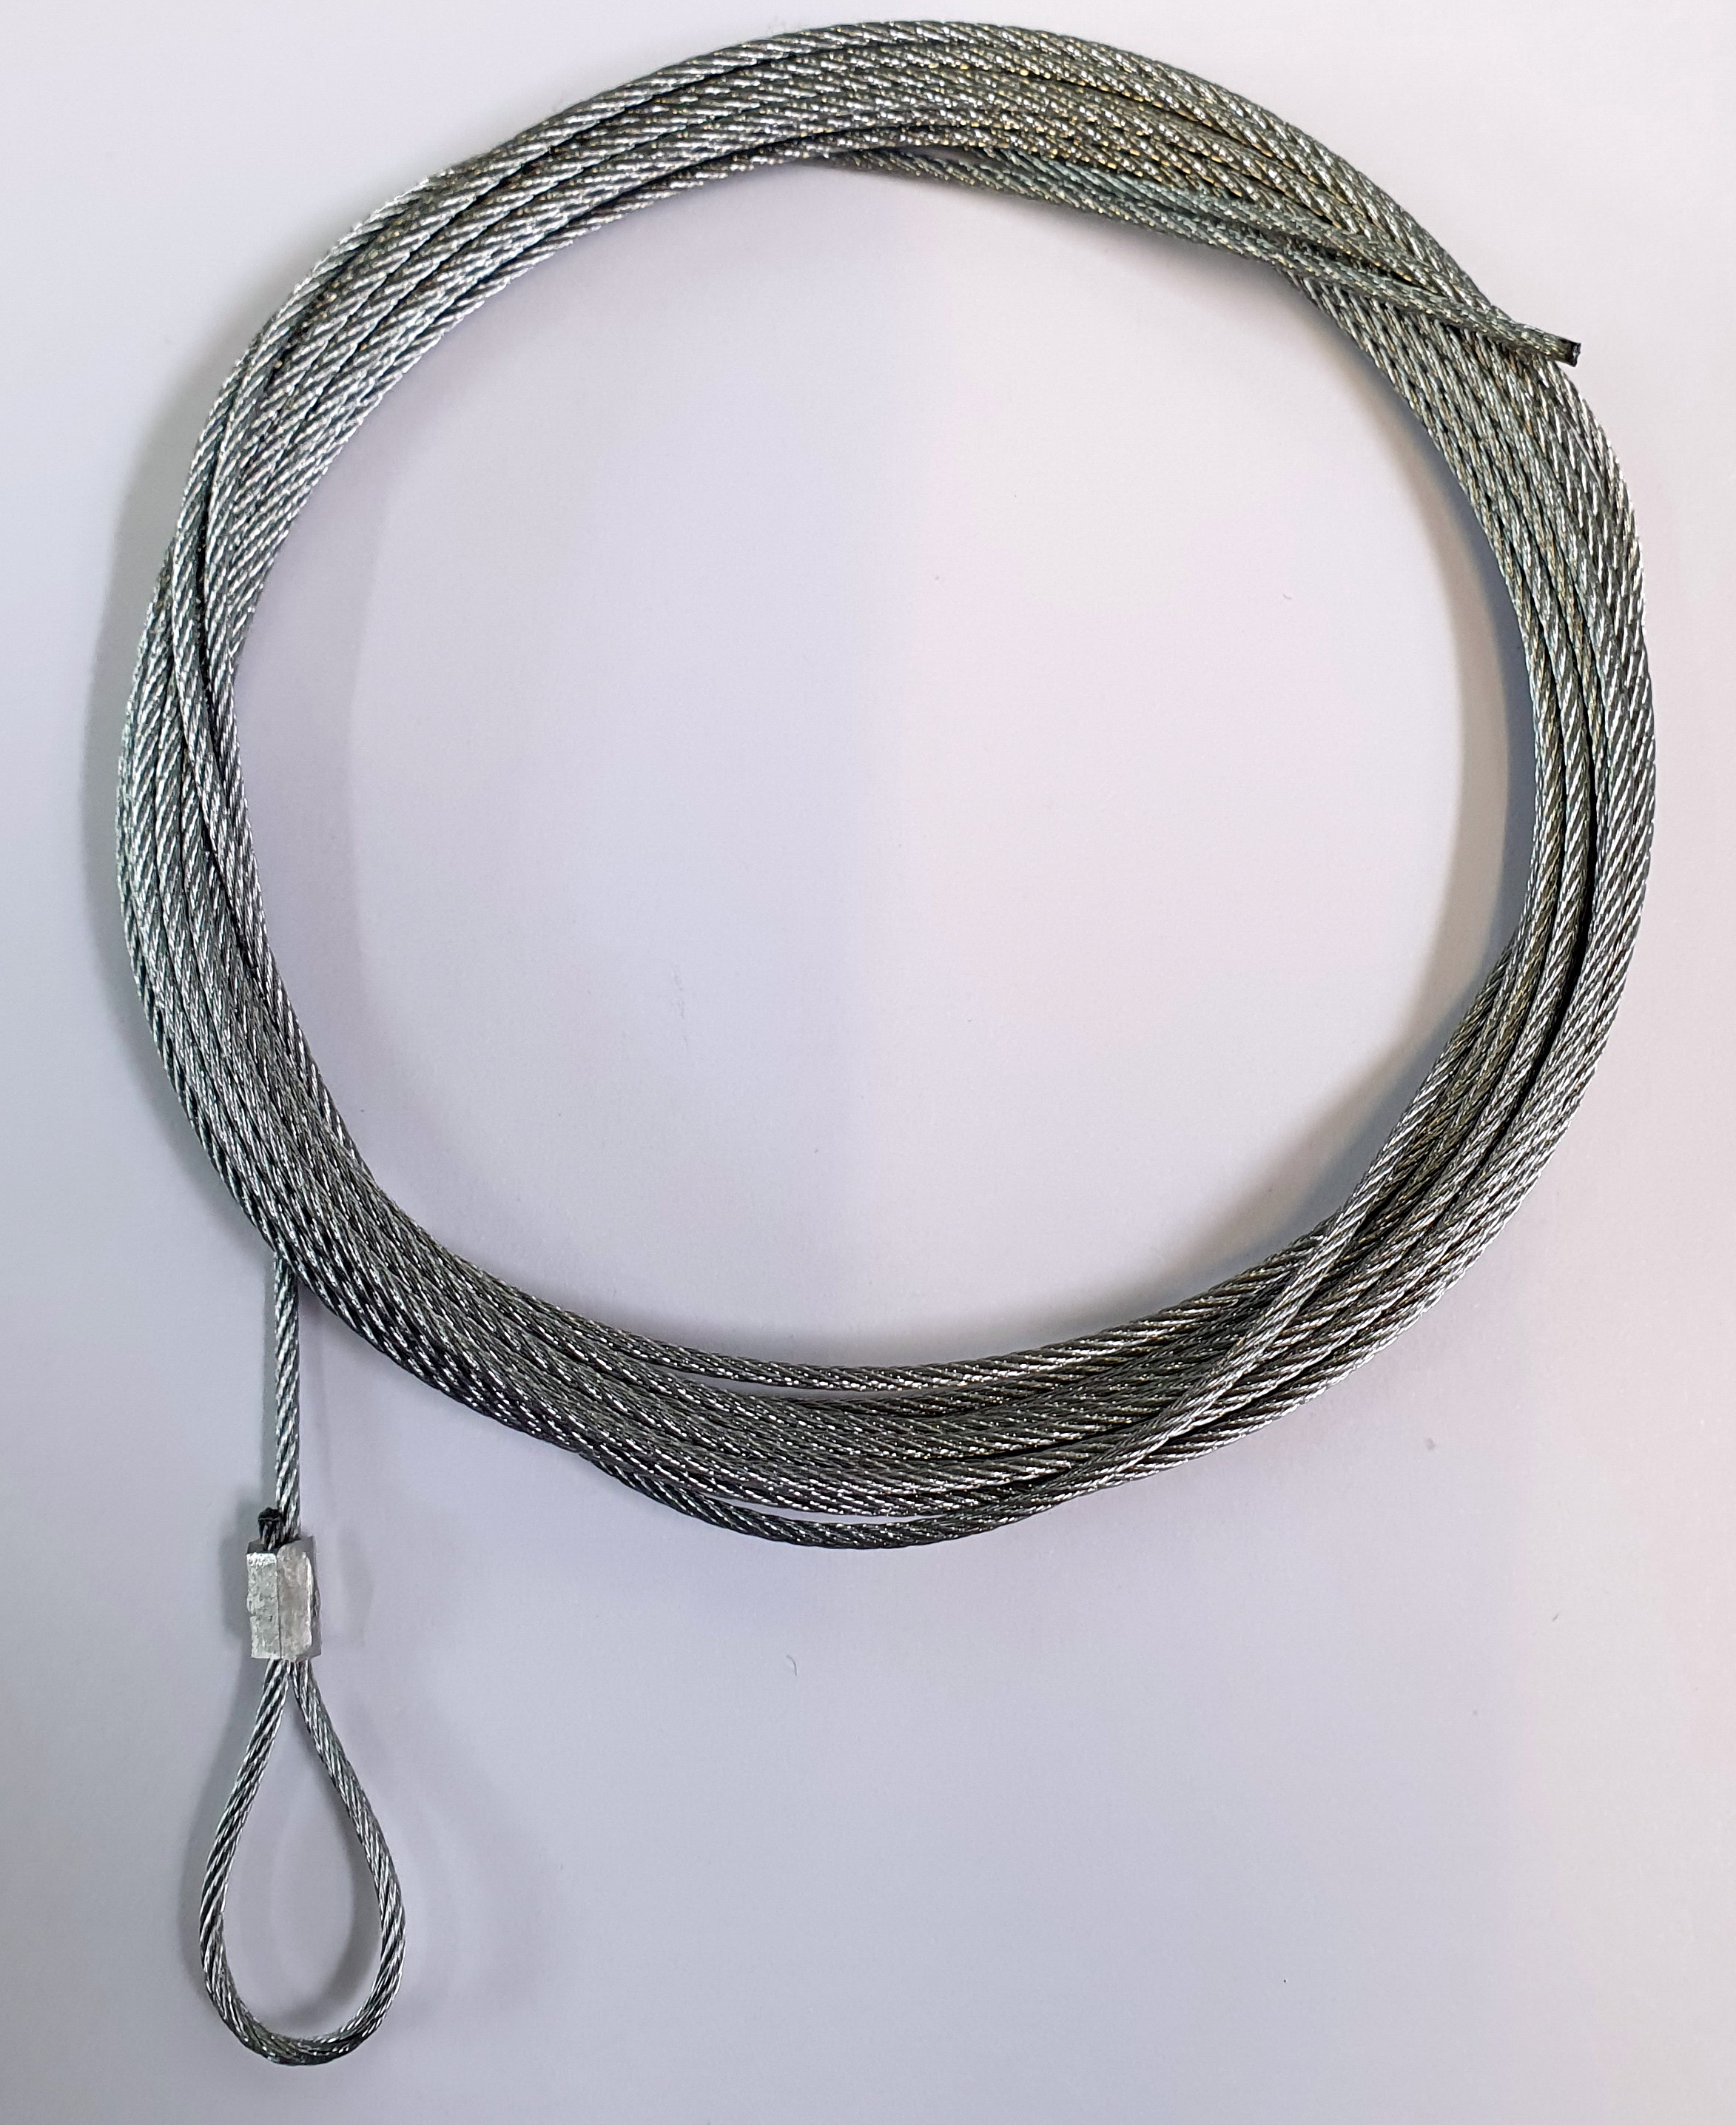 SUSPENSION CABLE - 1.5MM X 2MT WITH 7MM LOOP GALVANISED STEEL 7X7 CONSTRUCTION. SAFE WORKING LOAD 35KG; MINIMUM BREAKING LOAD 177KG